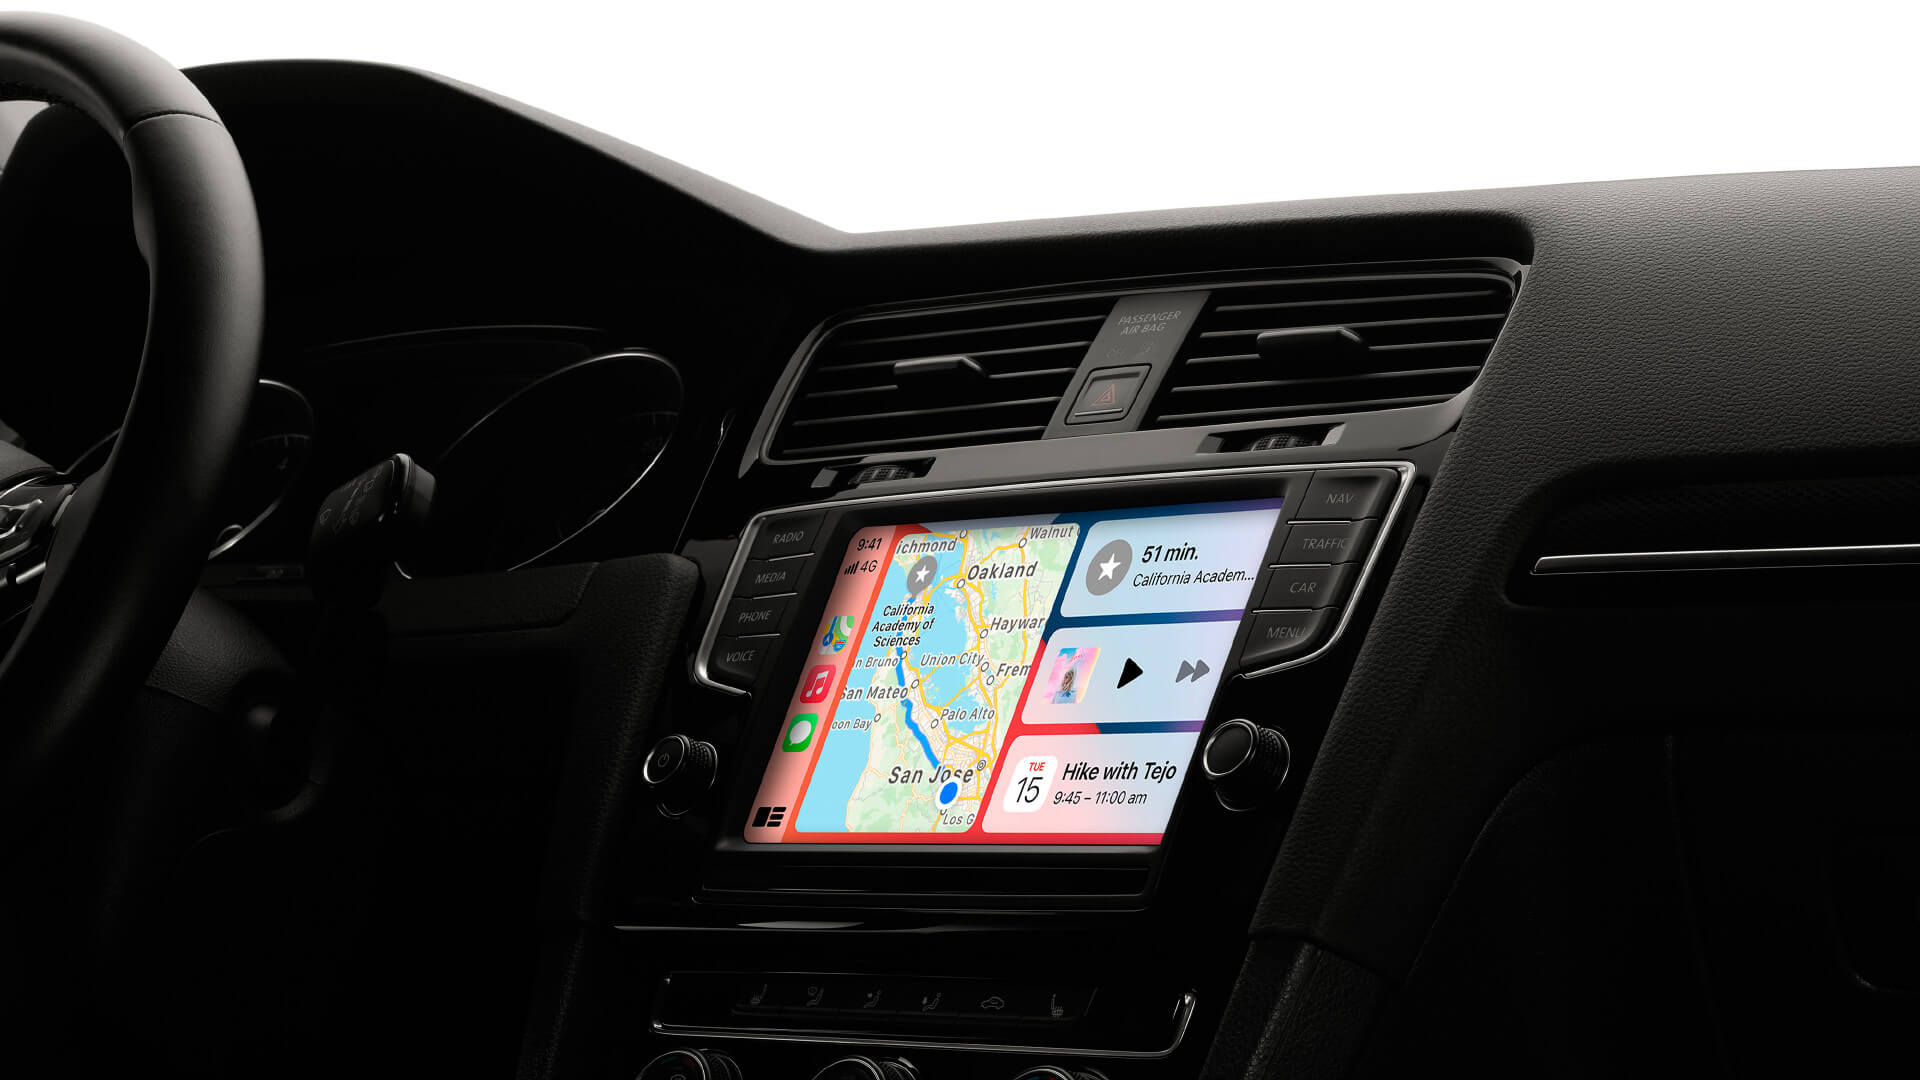 Car keys and CarPlay. A smarter ride from start to finish